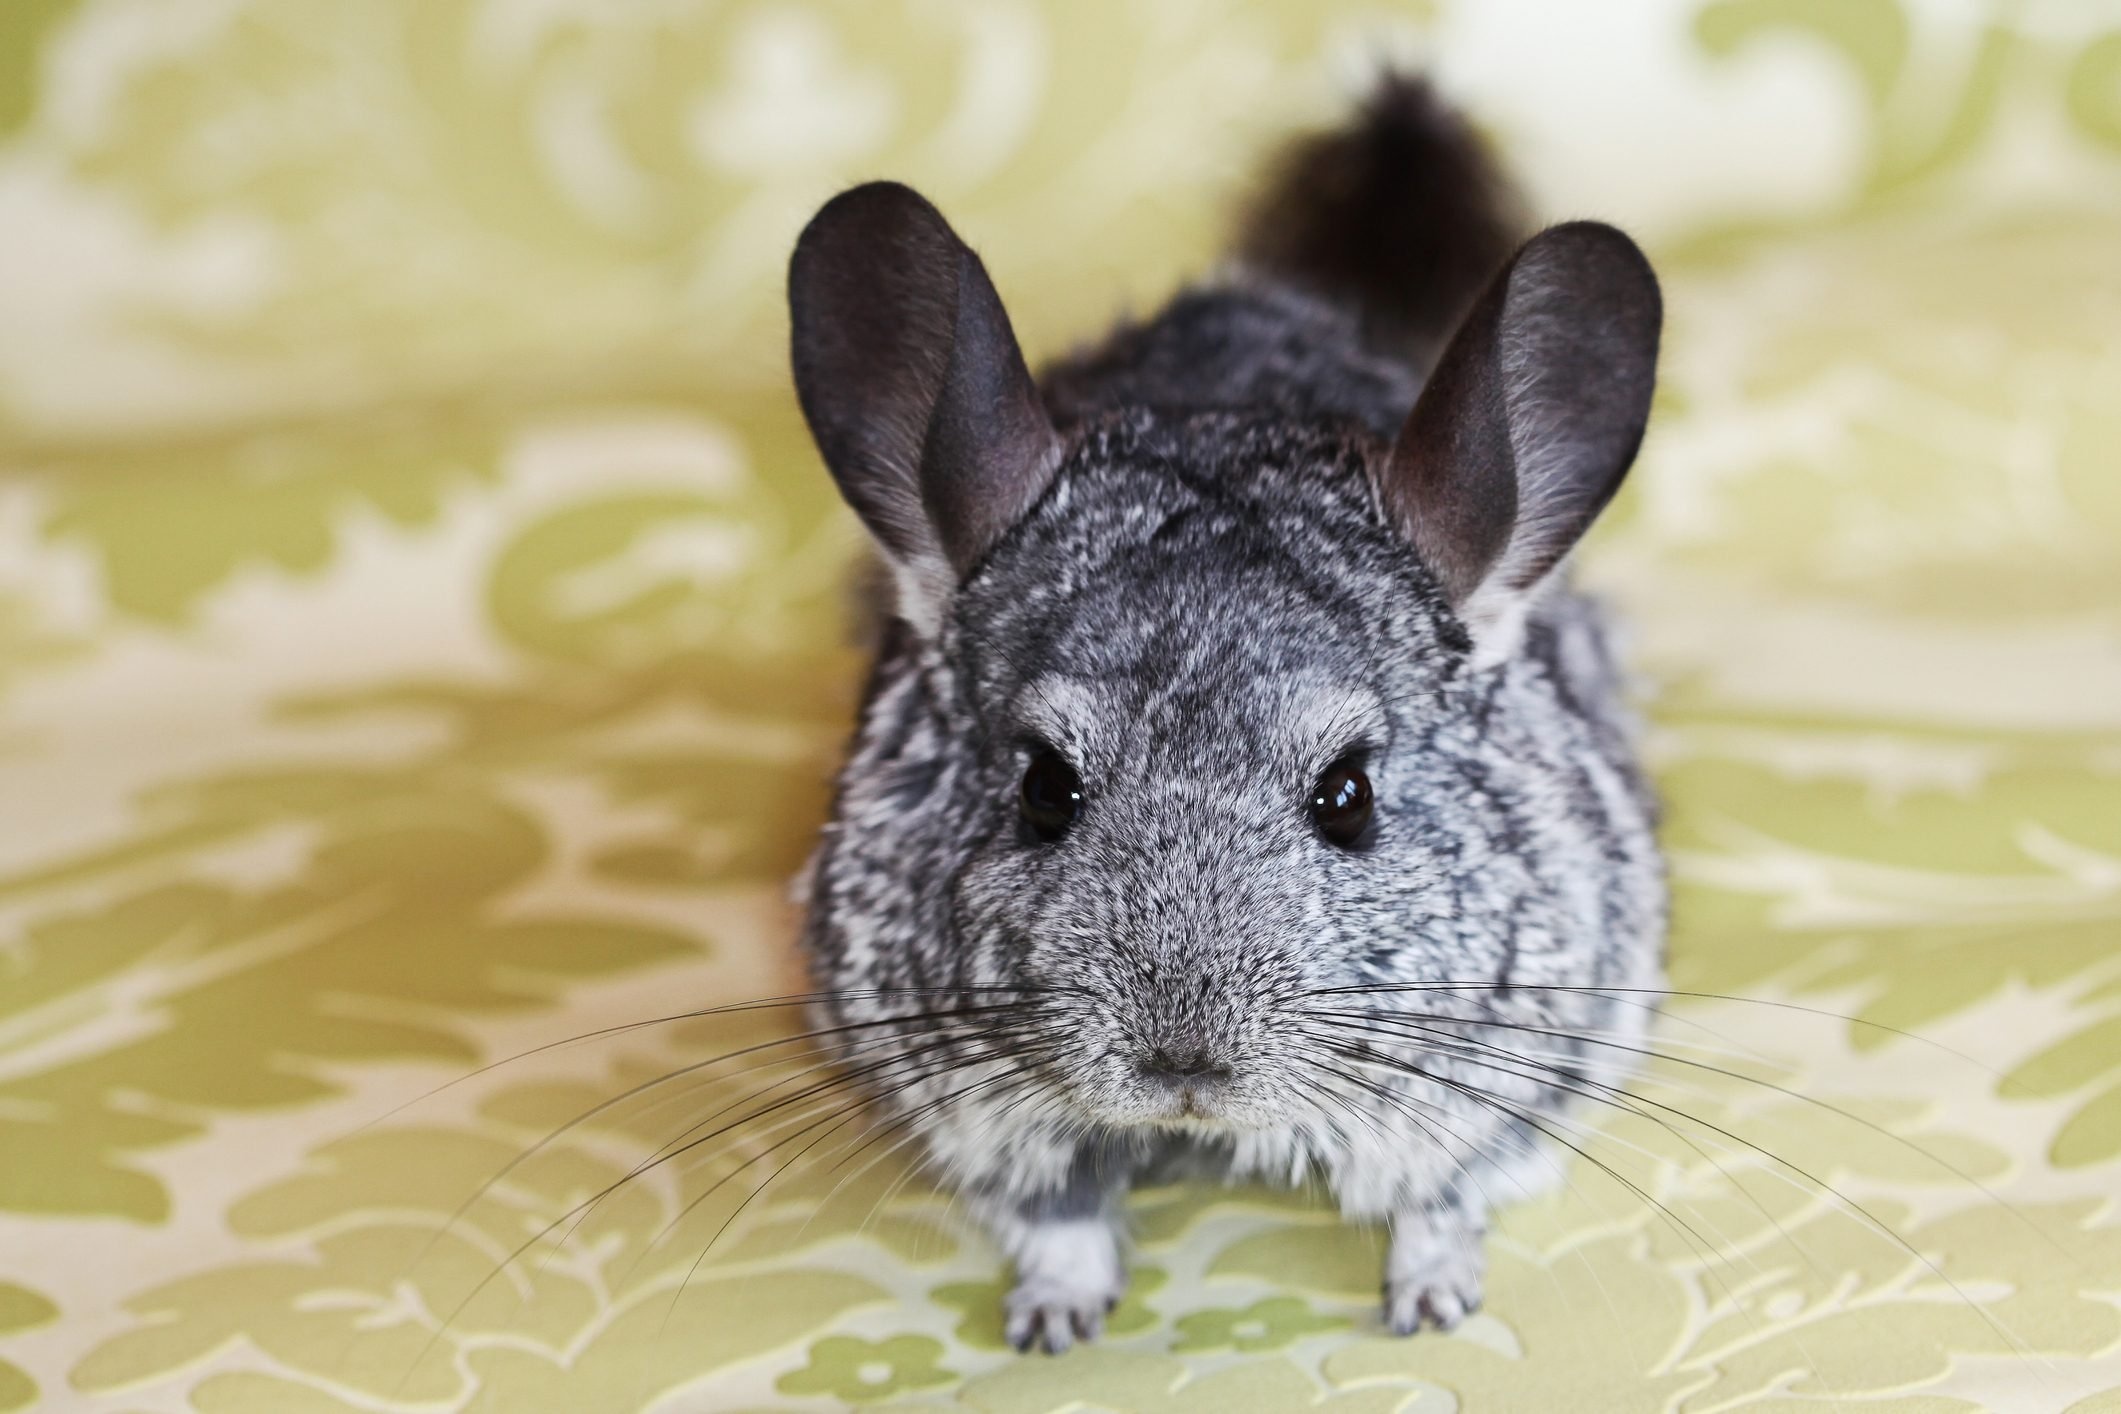 Chinchilla pictures, Cute and fluffy, Playful rodent, Pet lovers, 2130x1420 HD Desktop